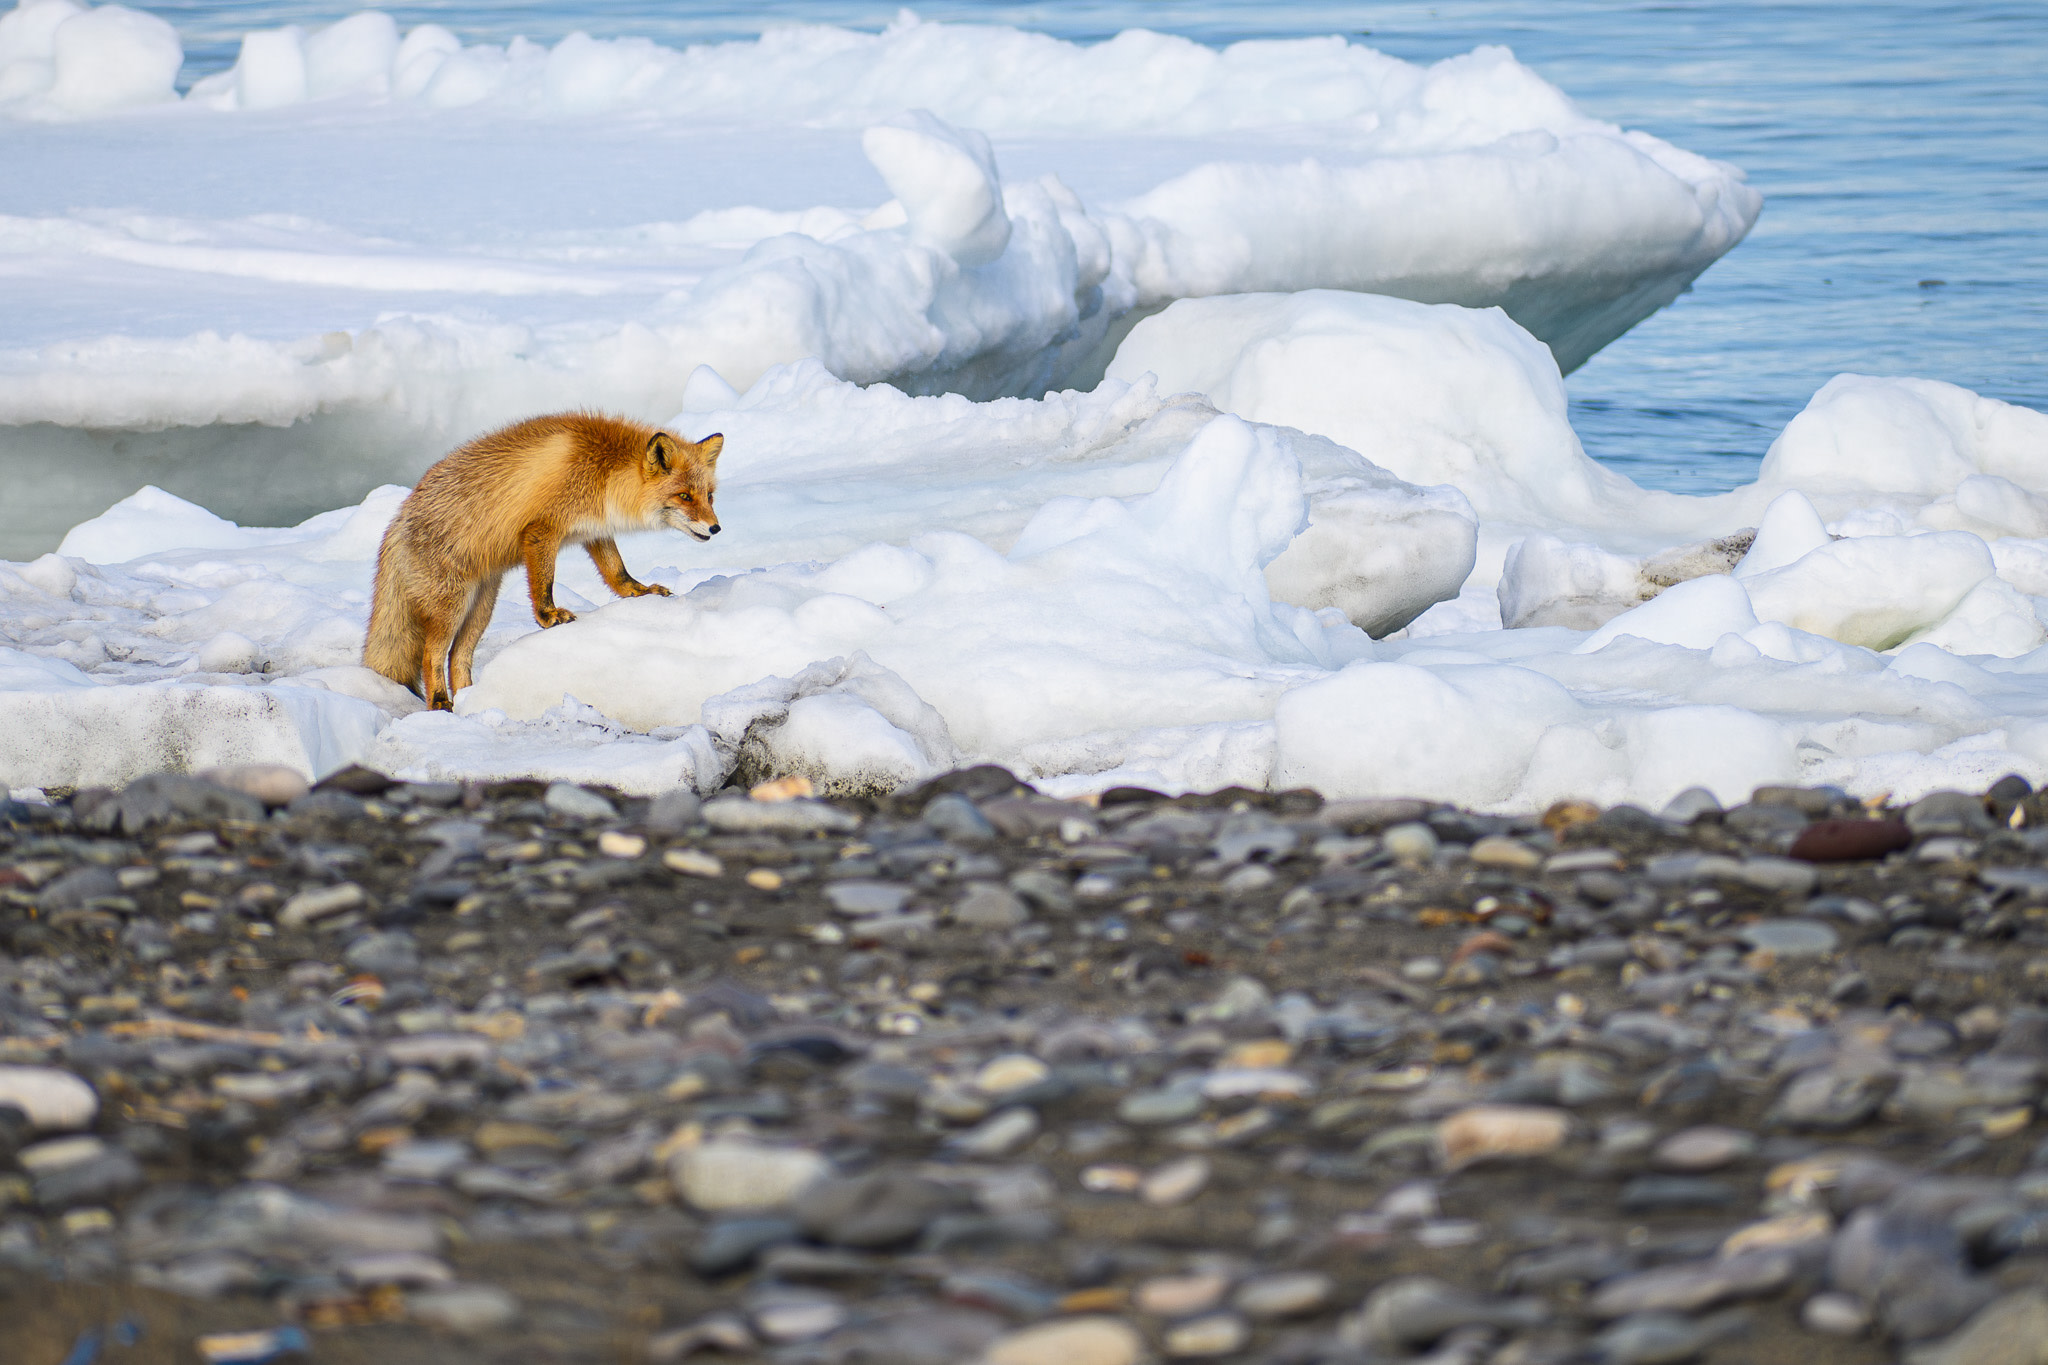 A fox in the distance climbs on drift ice floes. It is looking at something far away to the right.